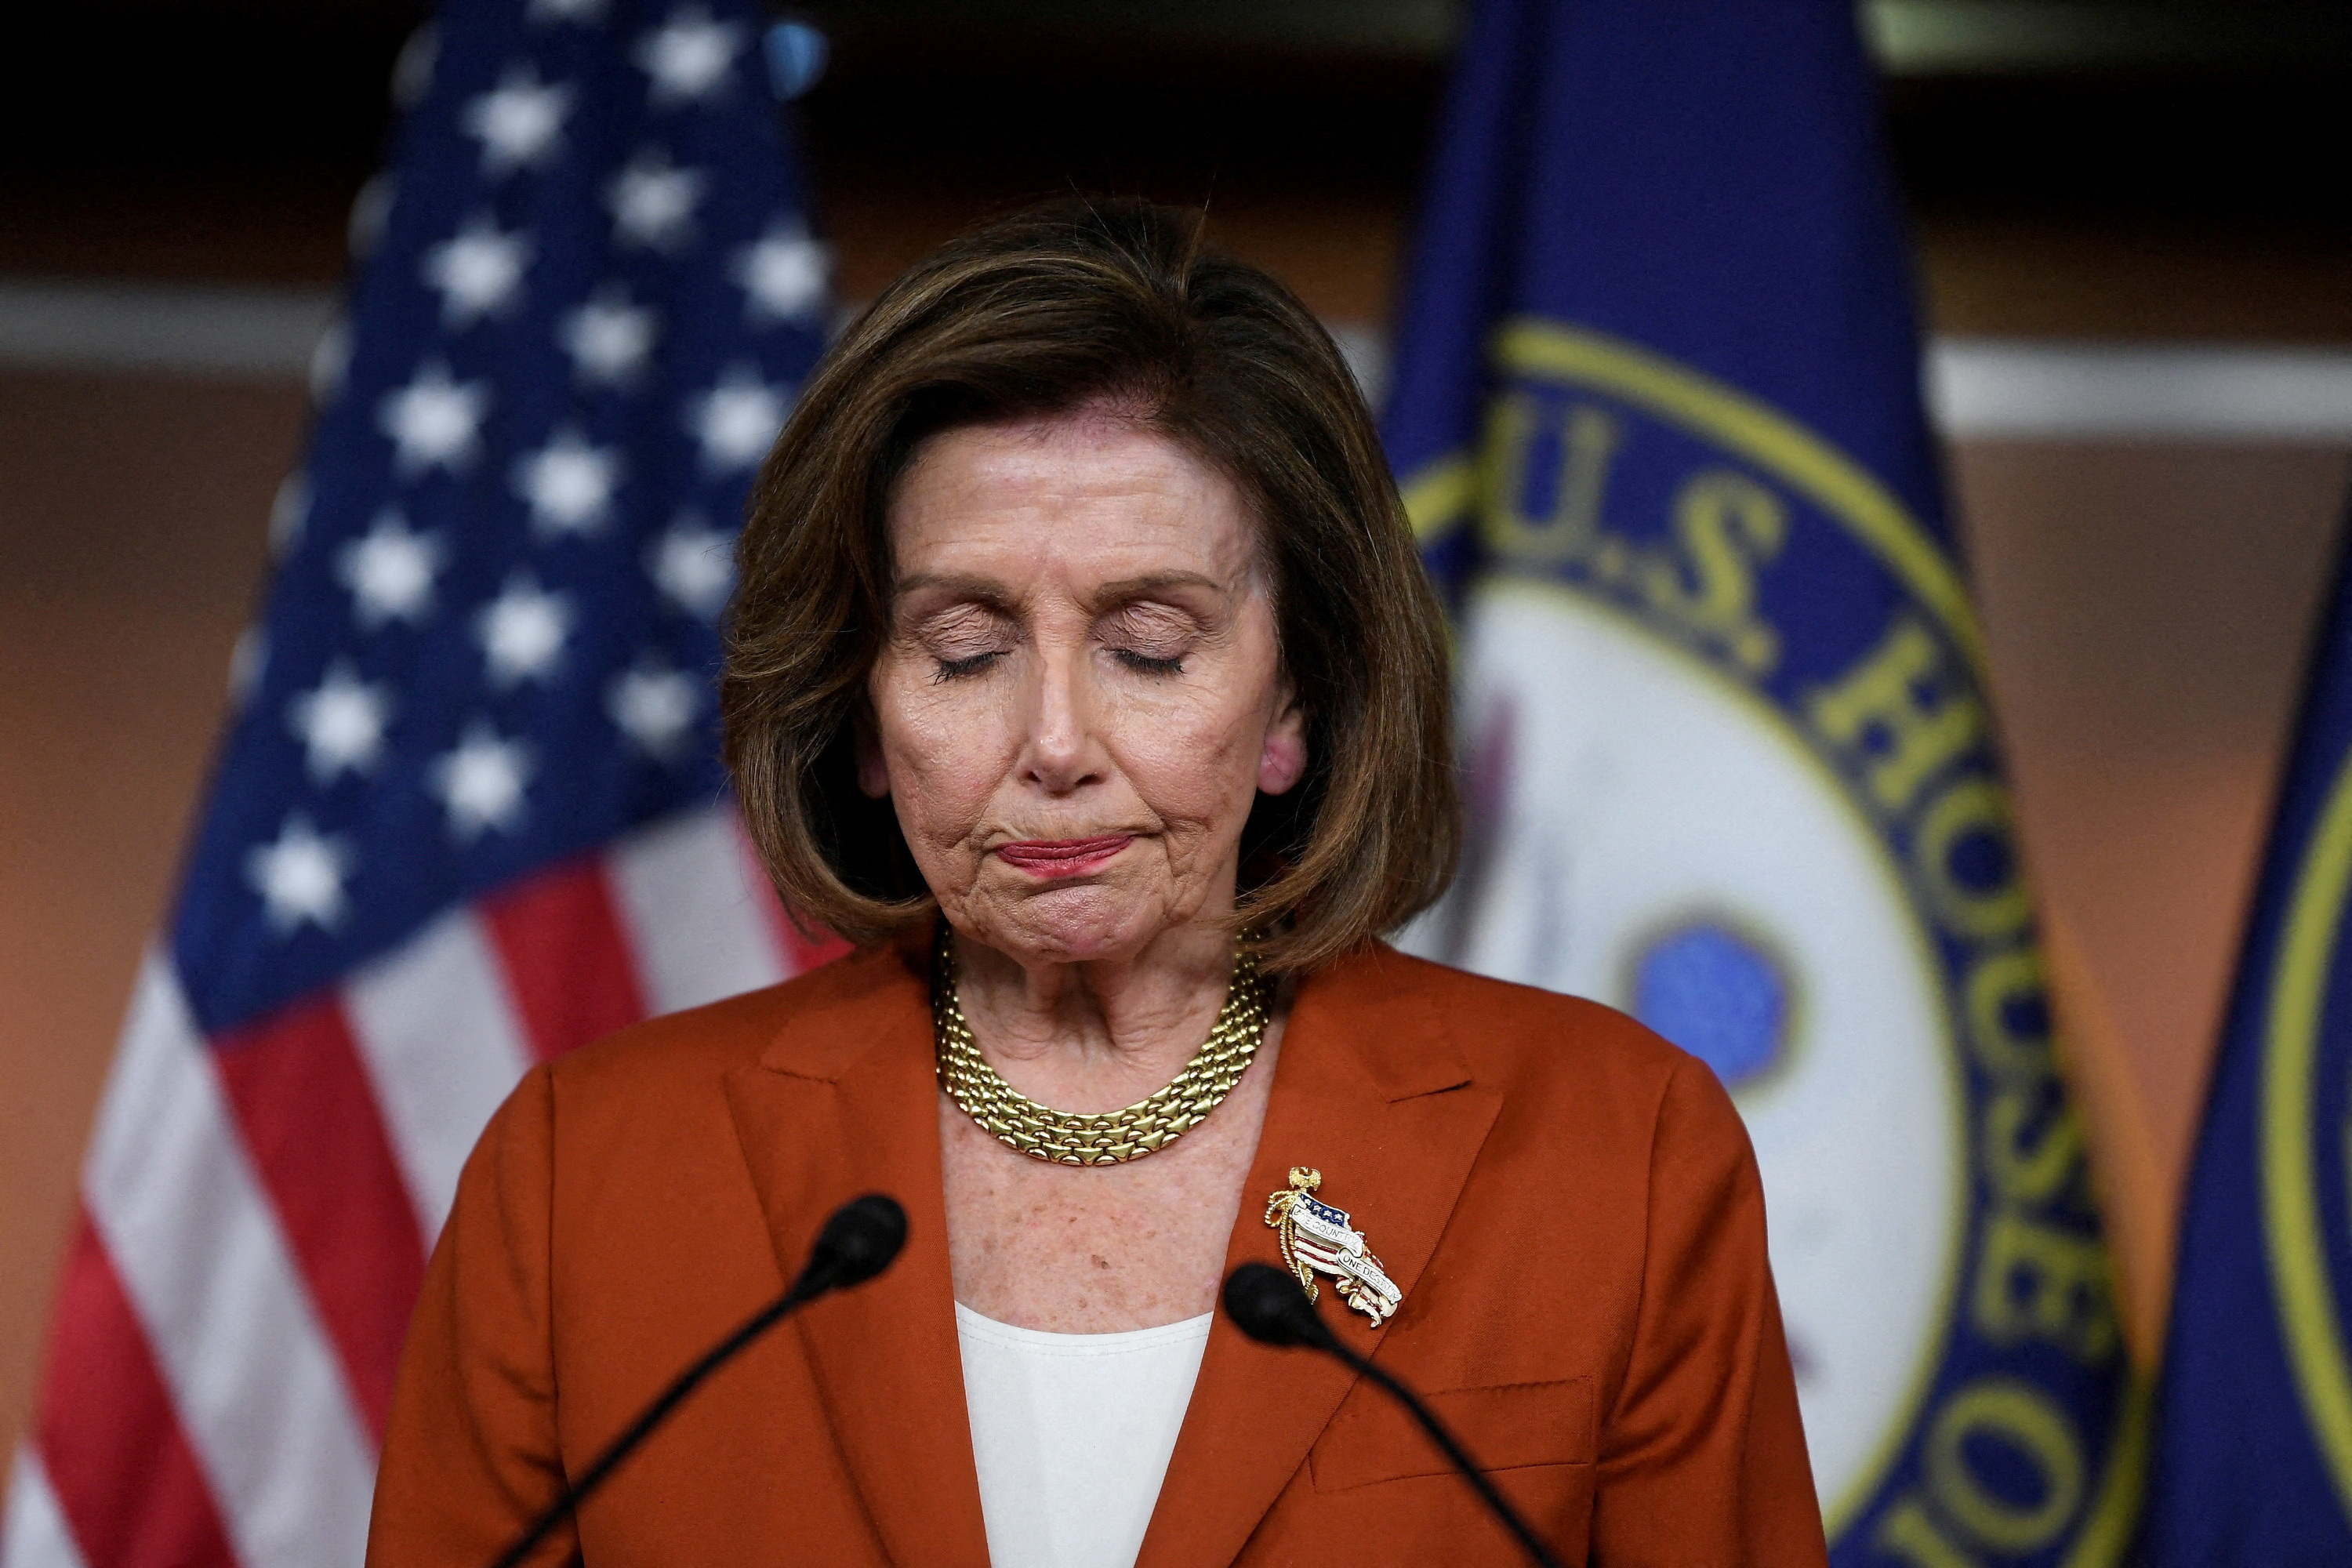 U.S. House Speaker Nancy Pelosi (D-CA) reacts to the overturning of Roe v Wade during her weekly news conference on Capitol Hill